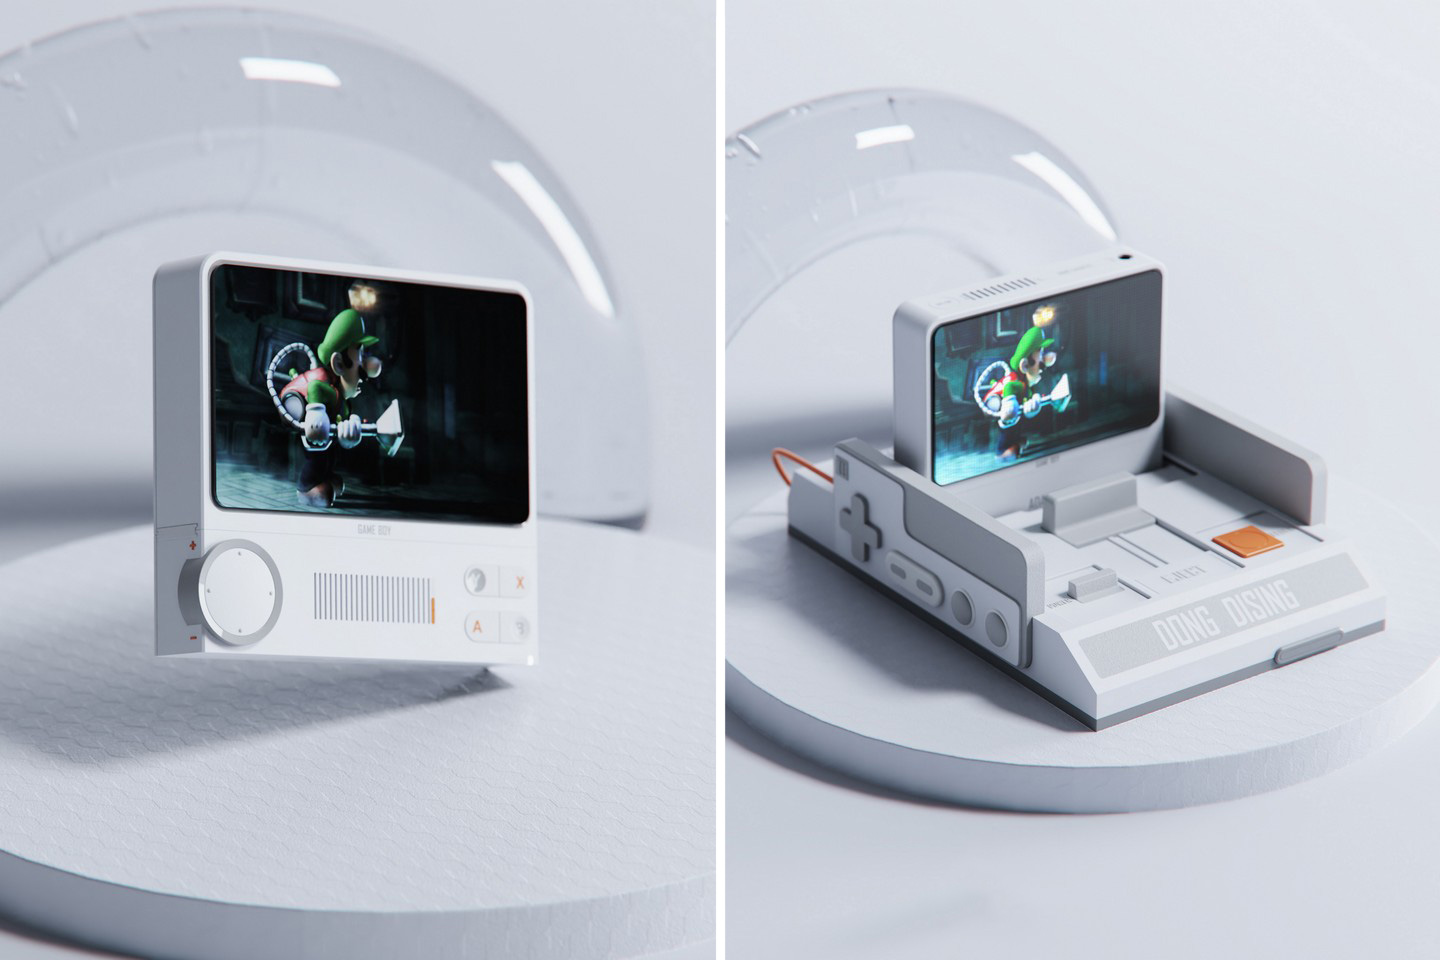 https://www.yankodesign.com/images/design_news/2022/08/this-shapeshifting-game-boy-console-has-the-soul-of-a-nintendo-switch/nintendo_game_boy_famicom_1.jpg